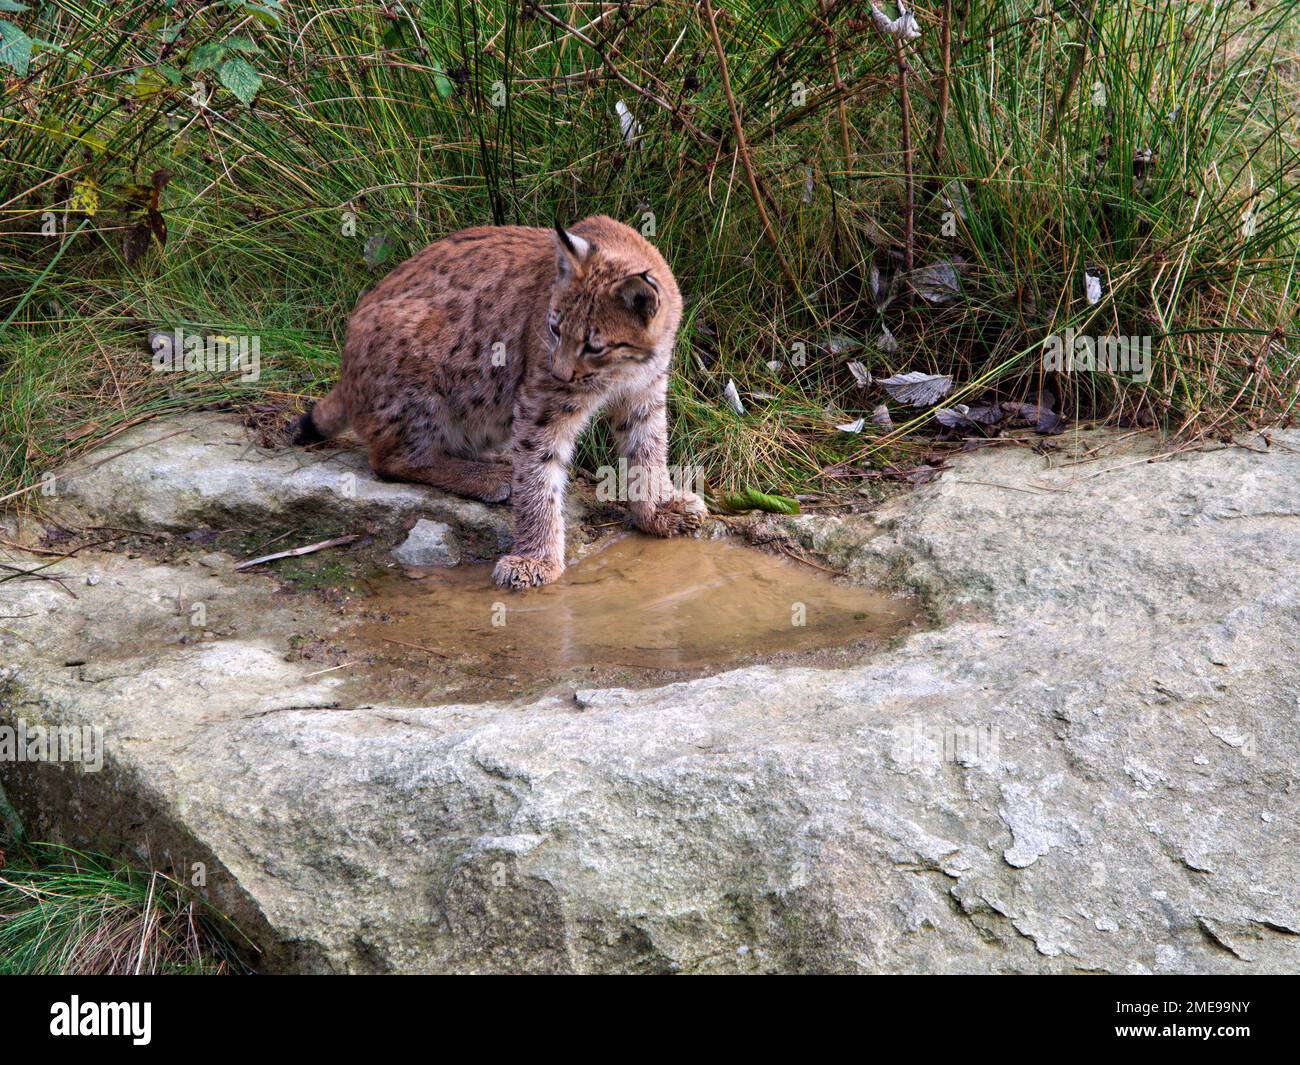 Young Lynx (Lynx lynx) exploring its environment in National Park Bavarian Forest, Bavaria, Germany Stock Photo